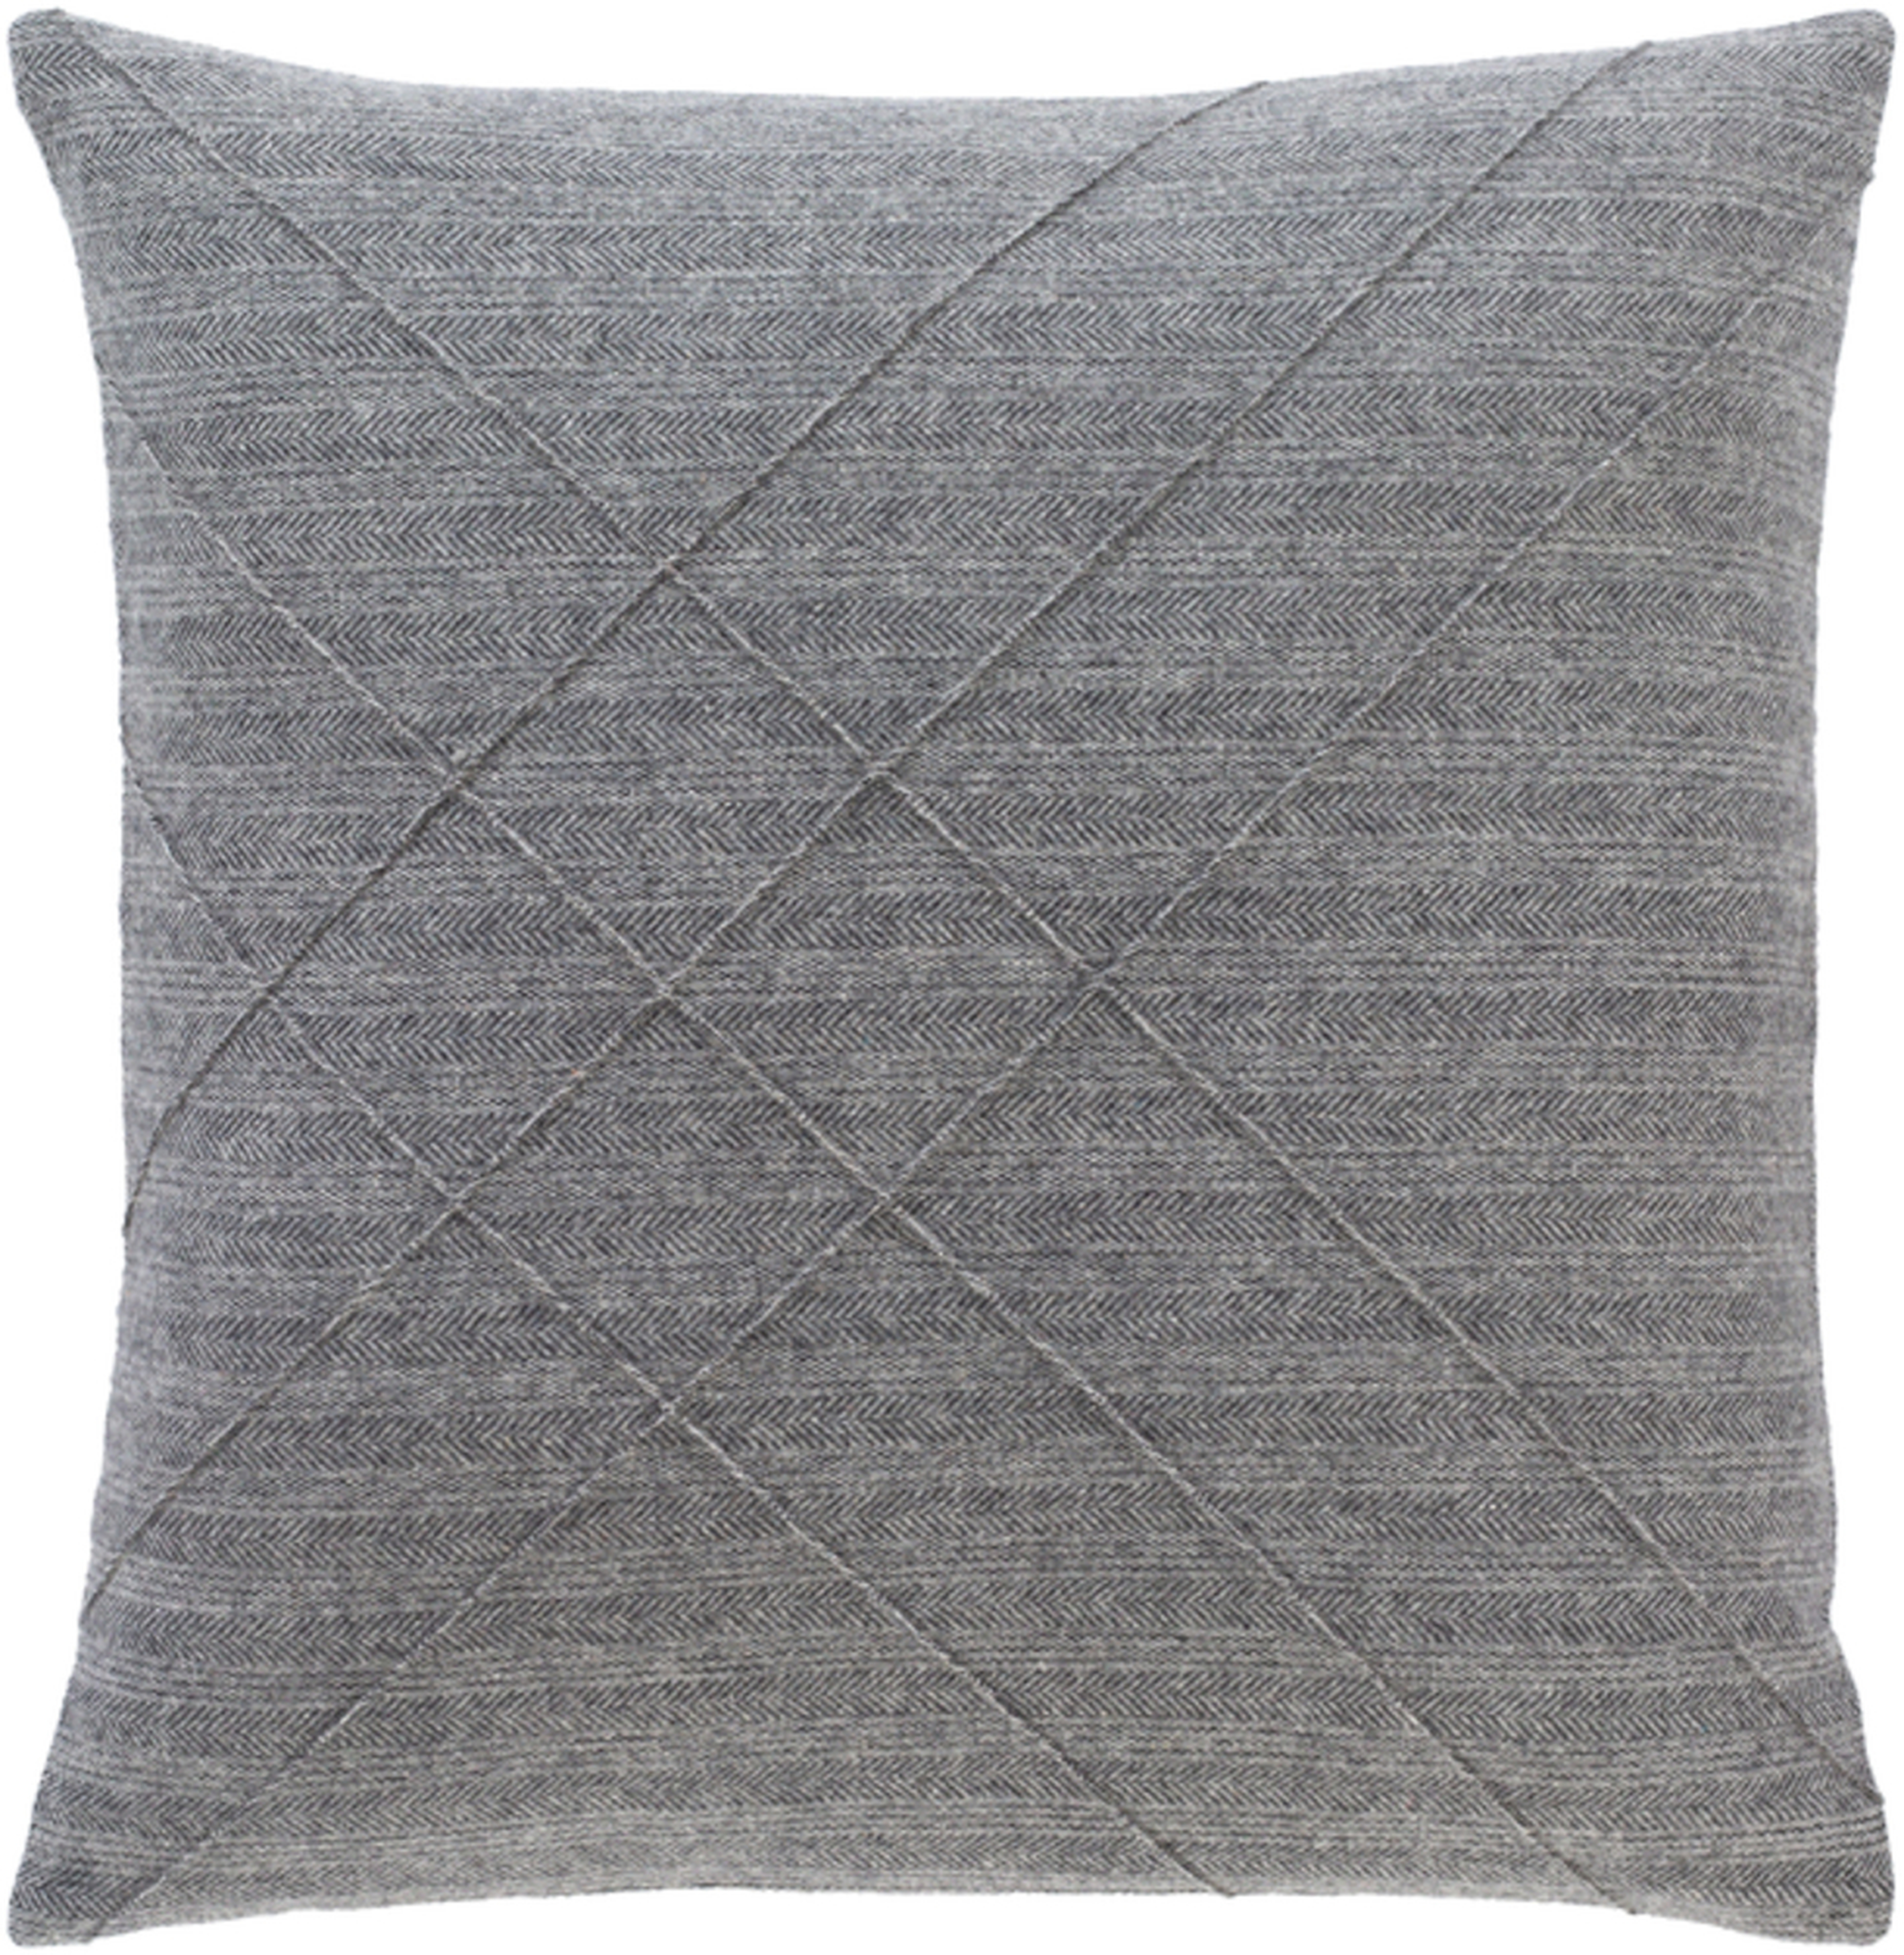 Welsley Pillow, 22" x 22", Charcoal - Cove Goods